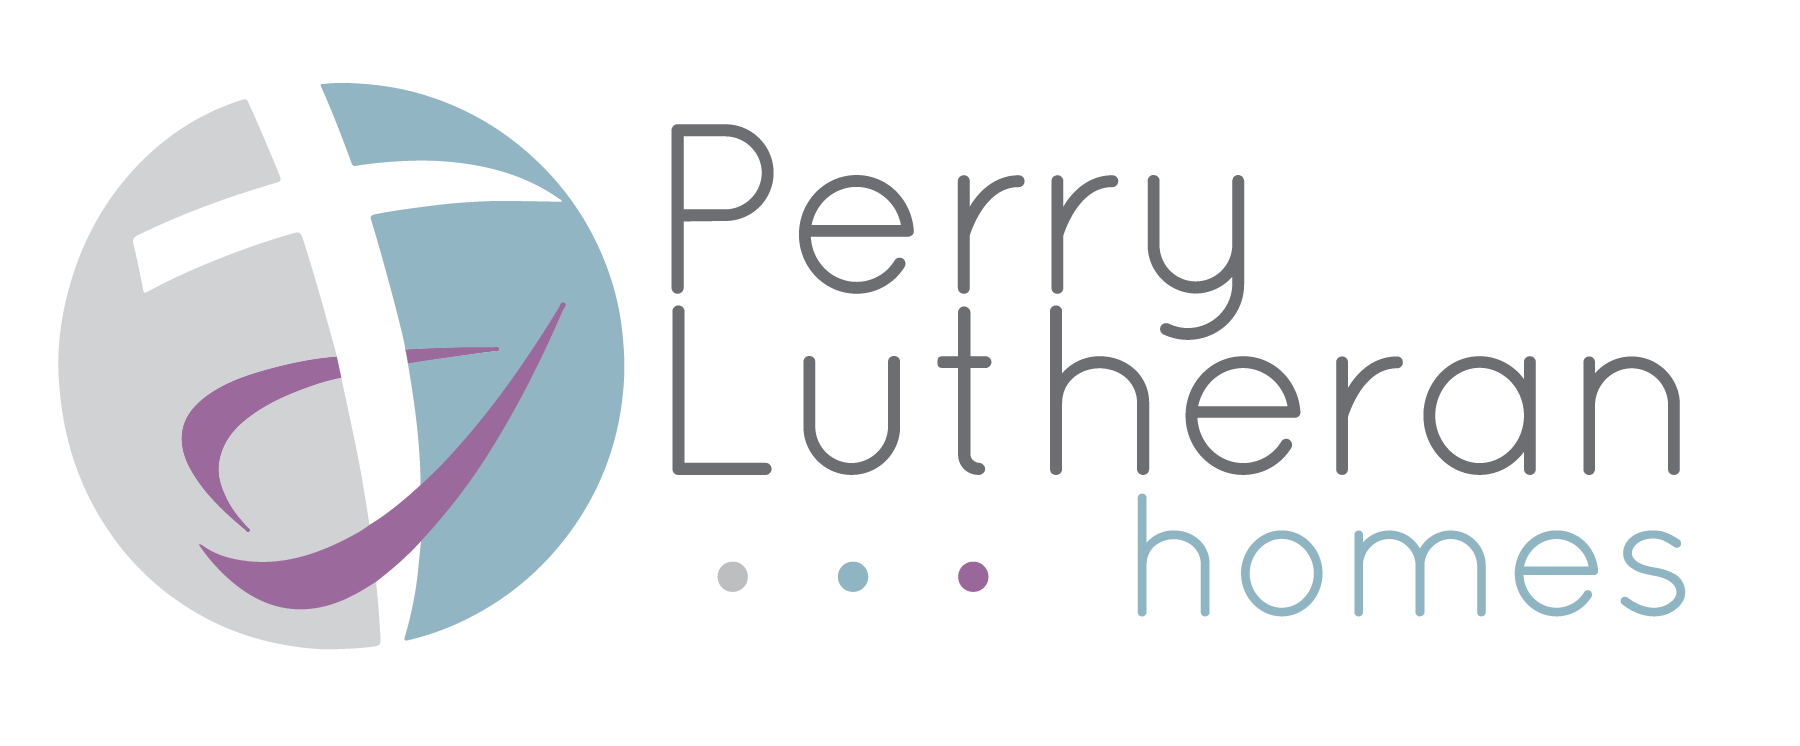 Perry Lutheran Homes